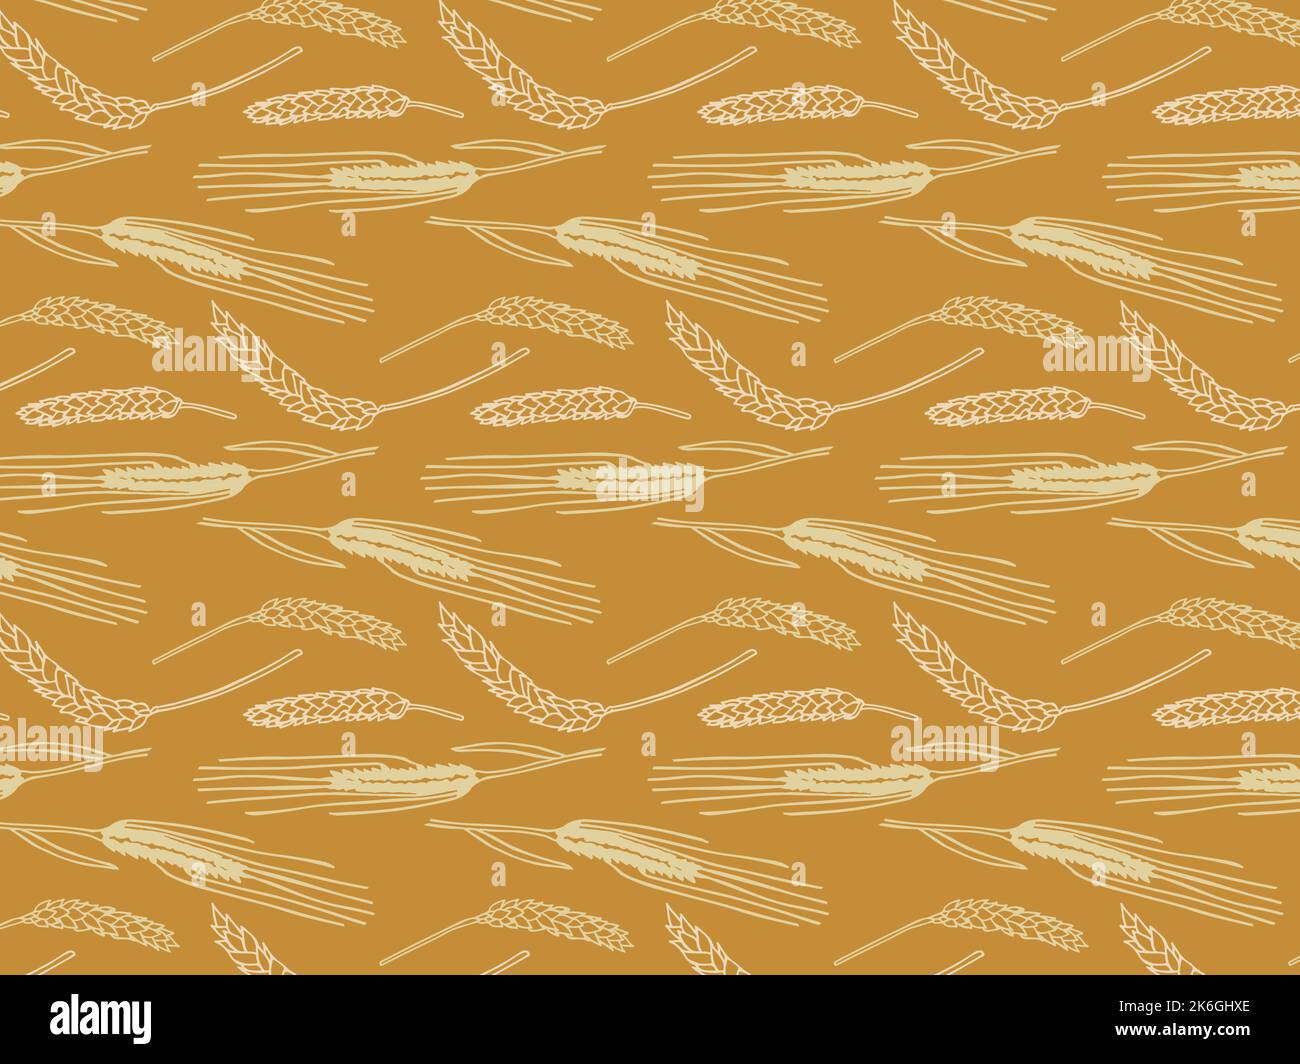 Spring wheat in golden colors pattern Stock Vector